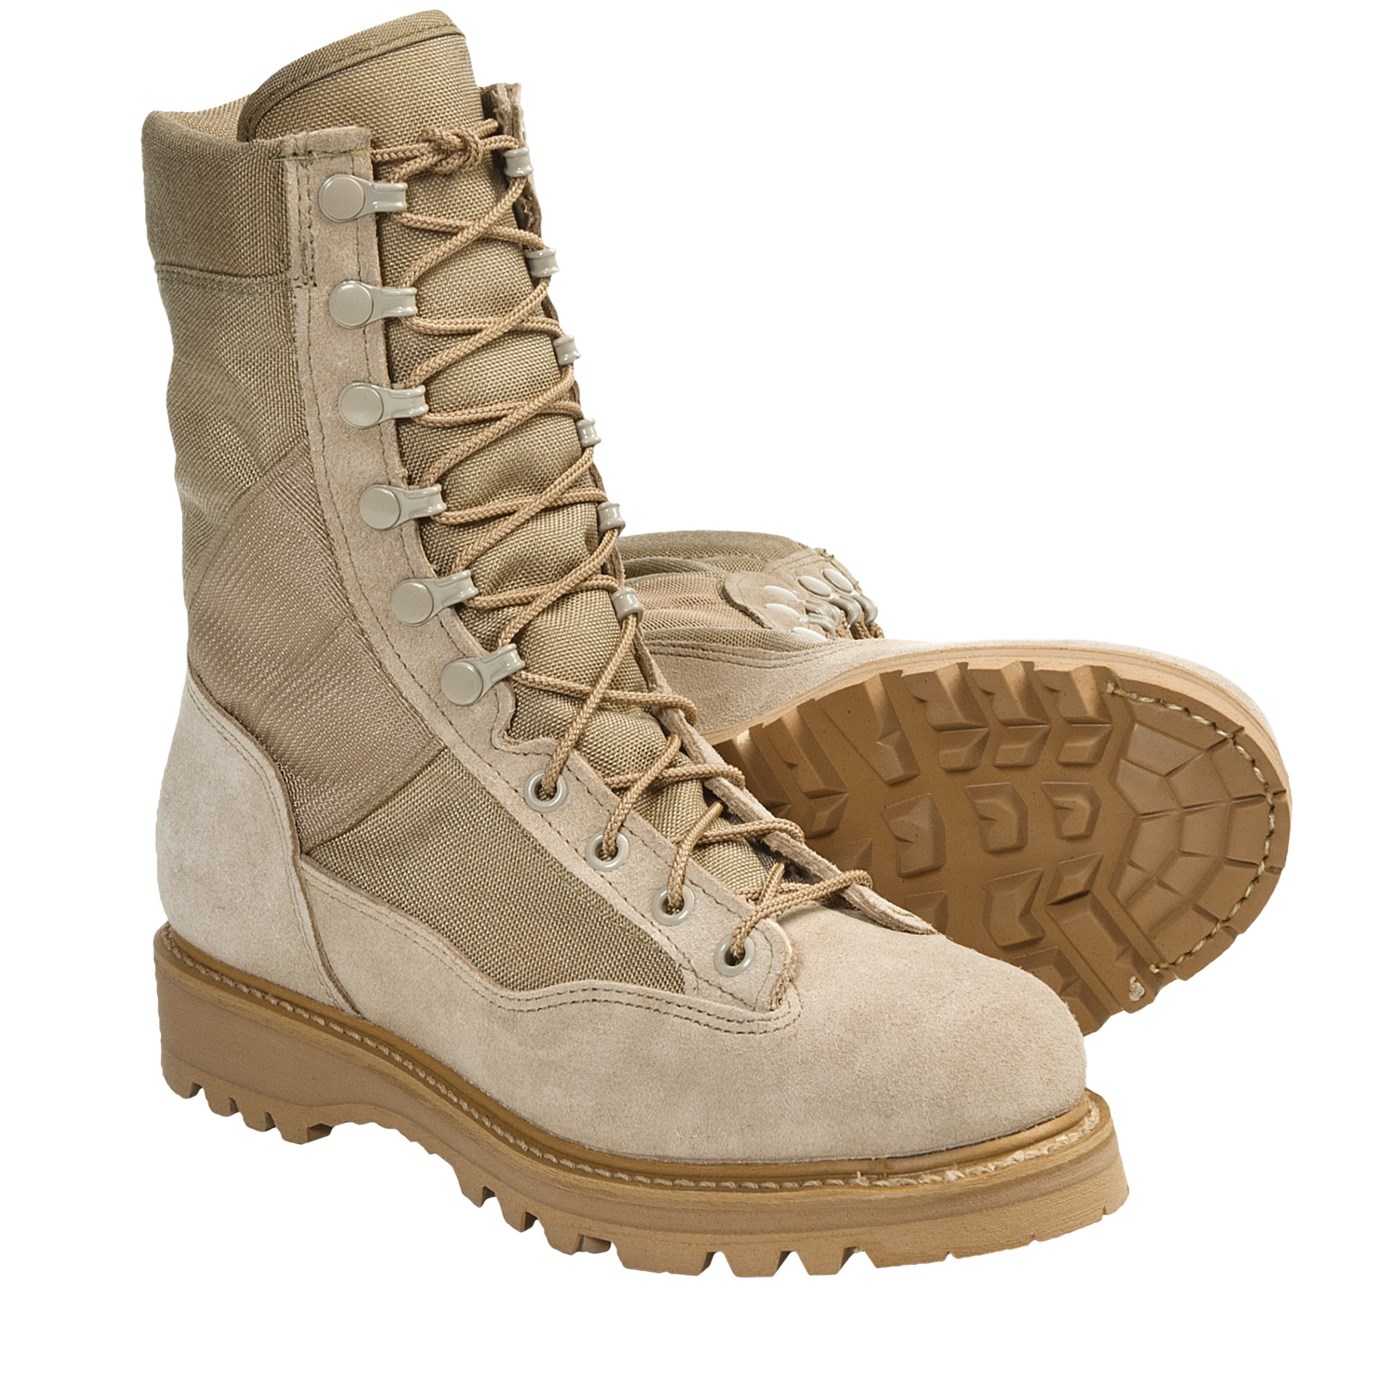 Corcoran Army Desert Combat Boots (For Women) 5915P 35